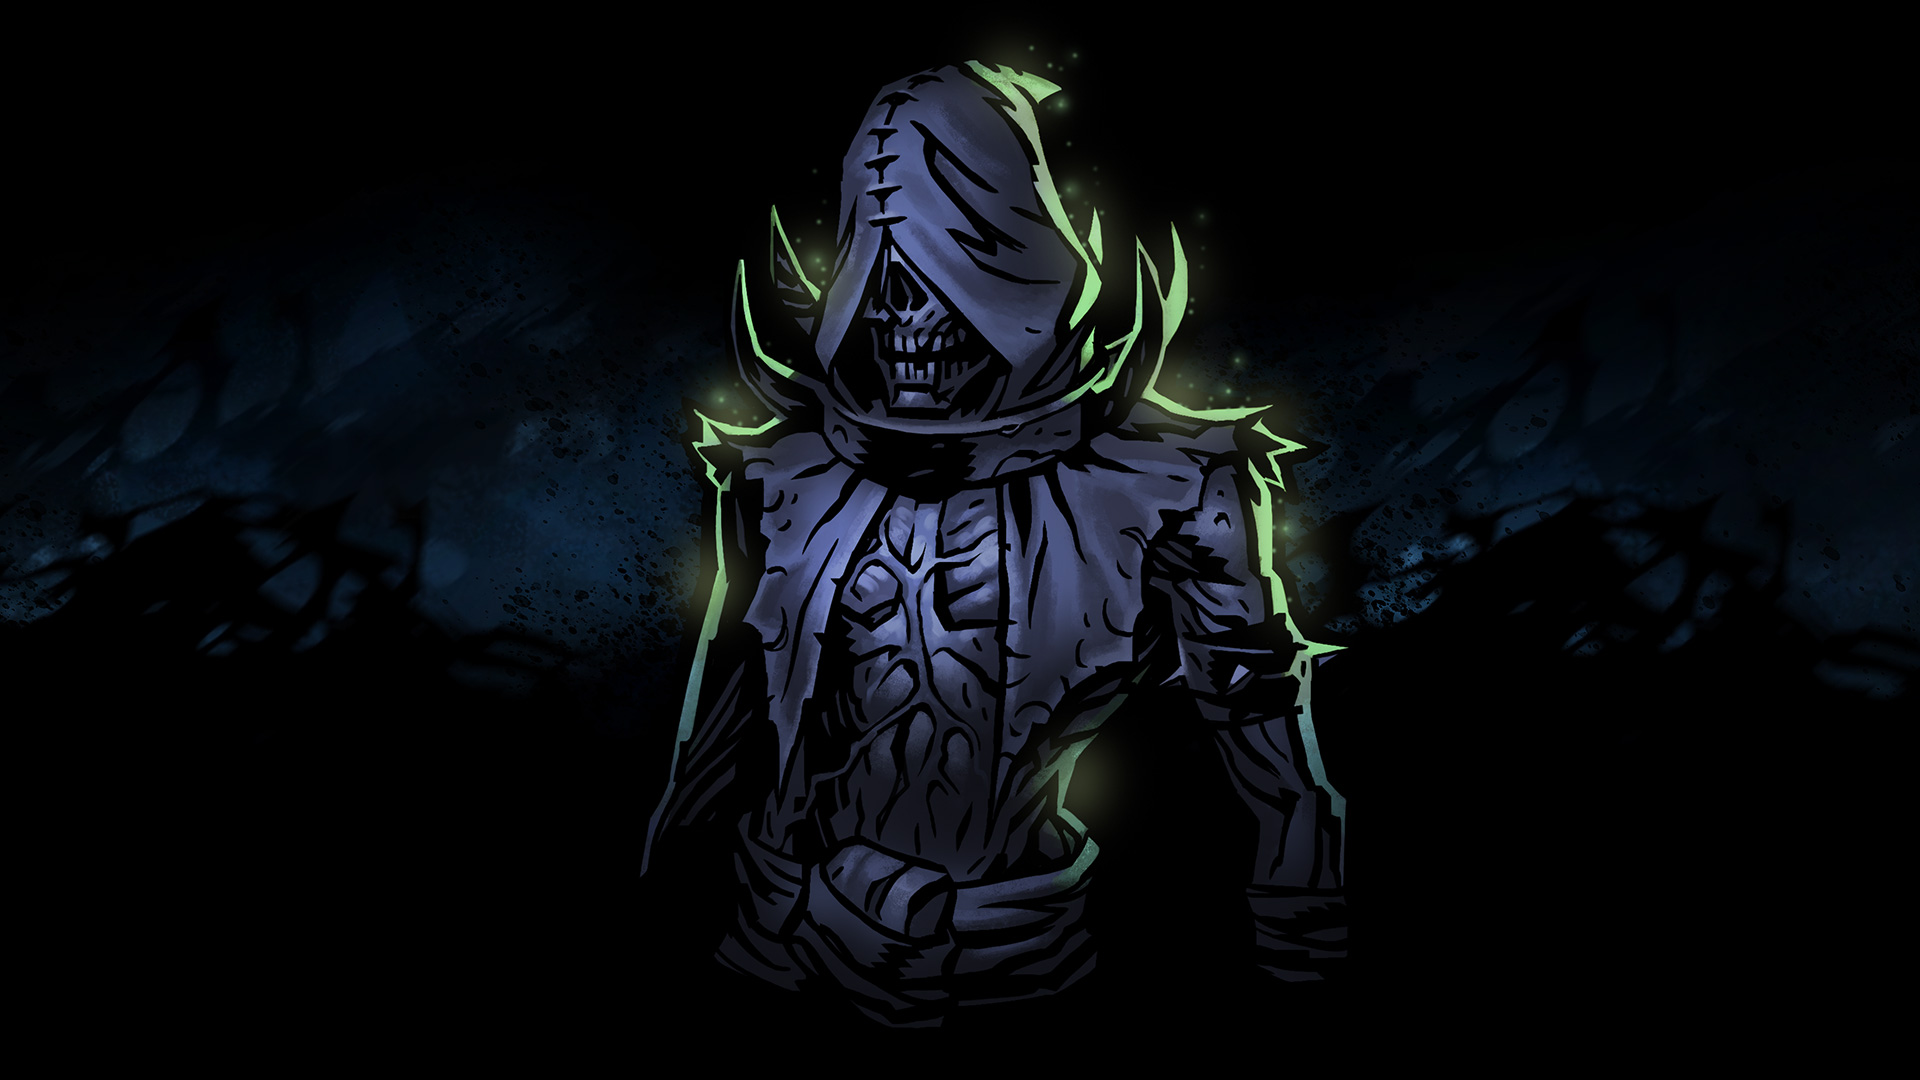 Darkest Dungeon 2 early access coming to Epic in 2021